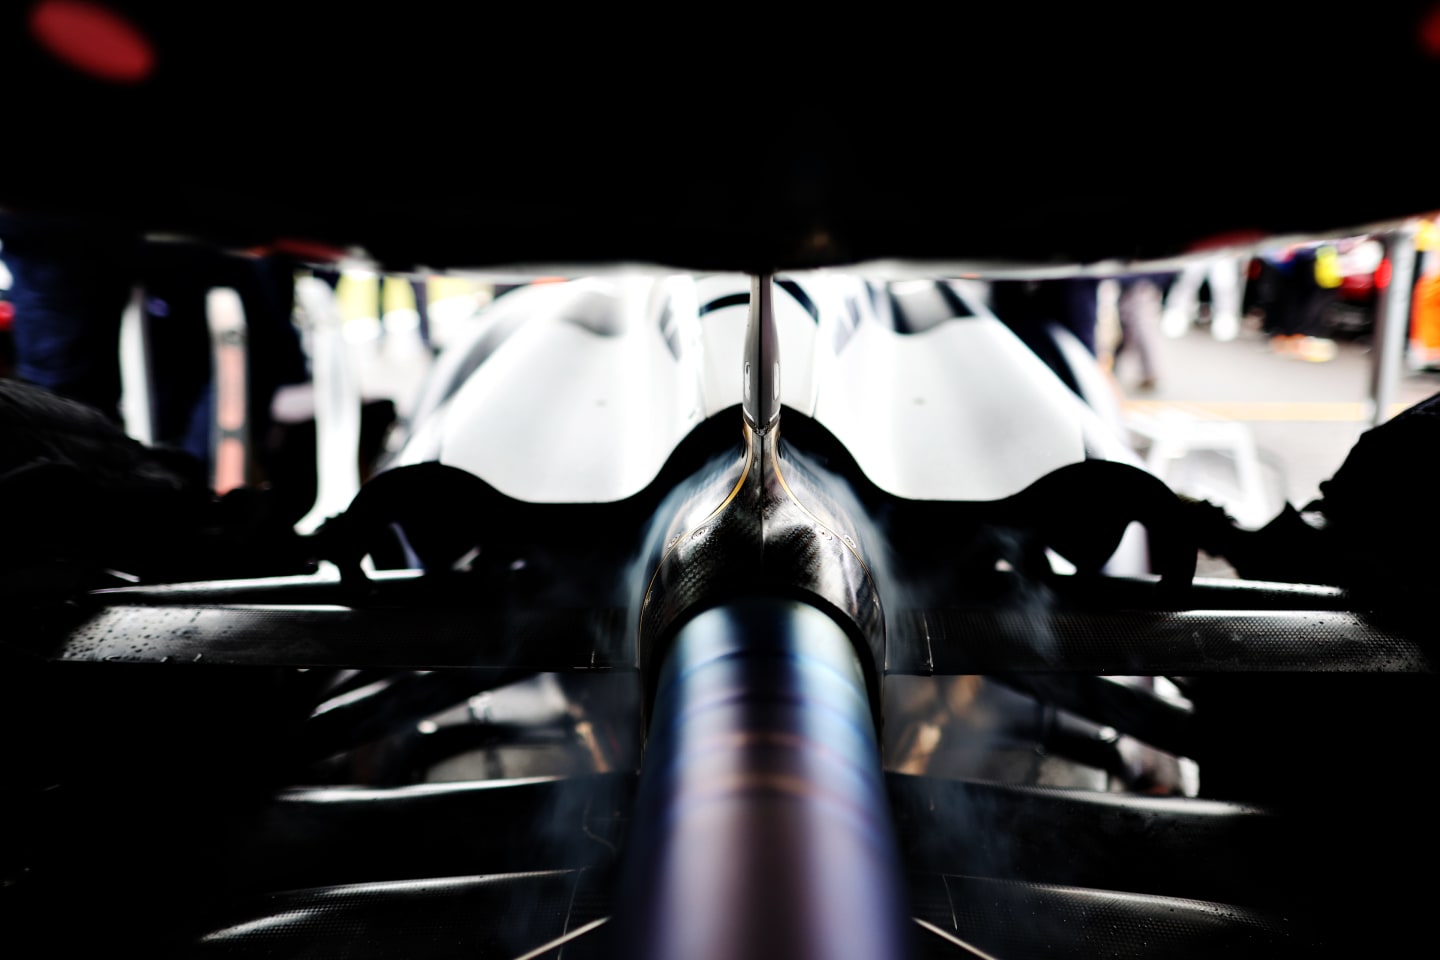 SUZUKA, JAPAN - OCTOBER 09: A detail view of the car of Yuki Tsunoda of Japan and Scuderia AlphaTauri during the F1 Grand Prix of Japan at Suzuka International Racing Course on October 09, 2022 in Suzuka, Japan. (Photo by Peter Fox/Getty Images)